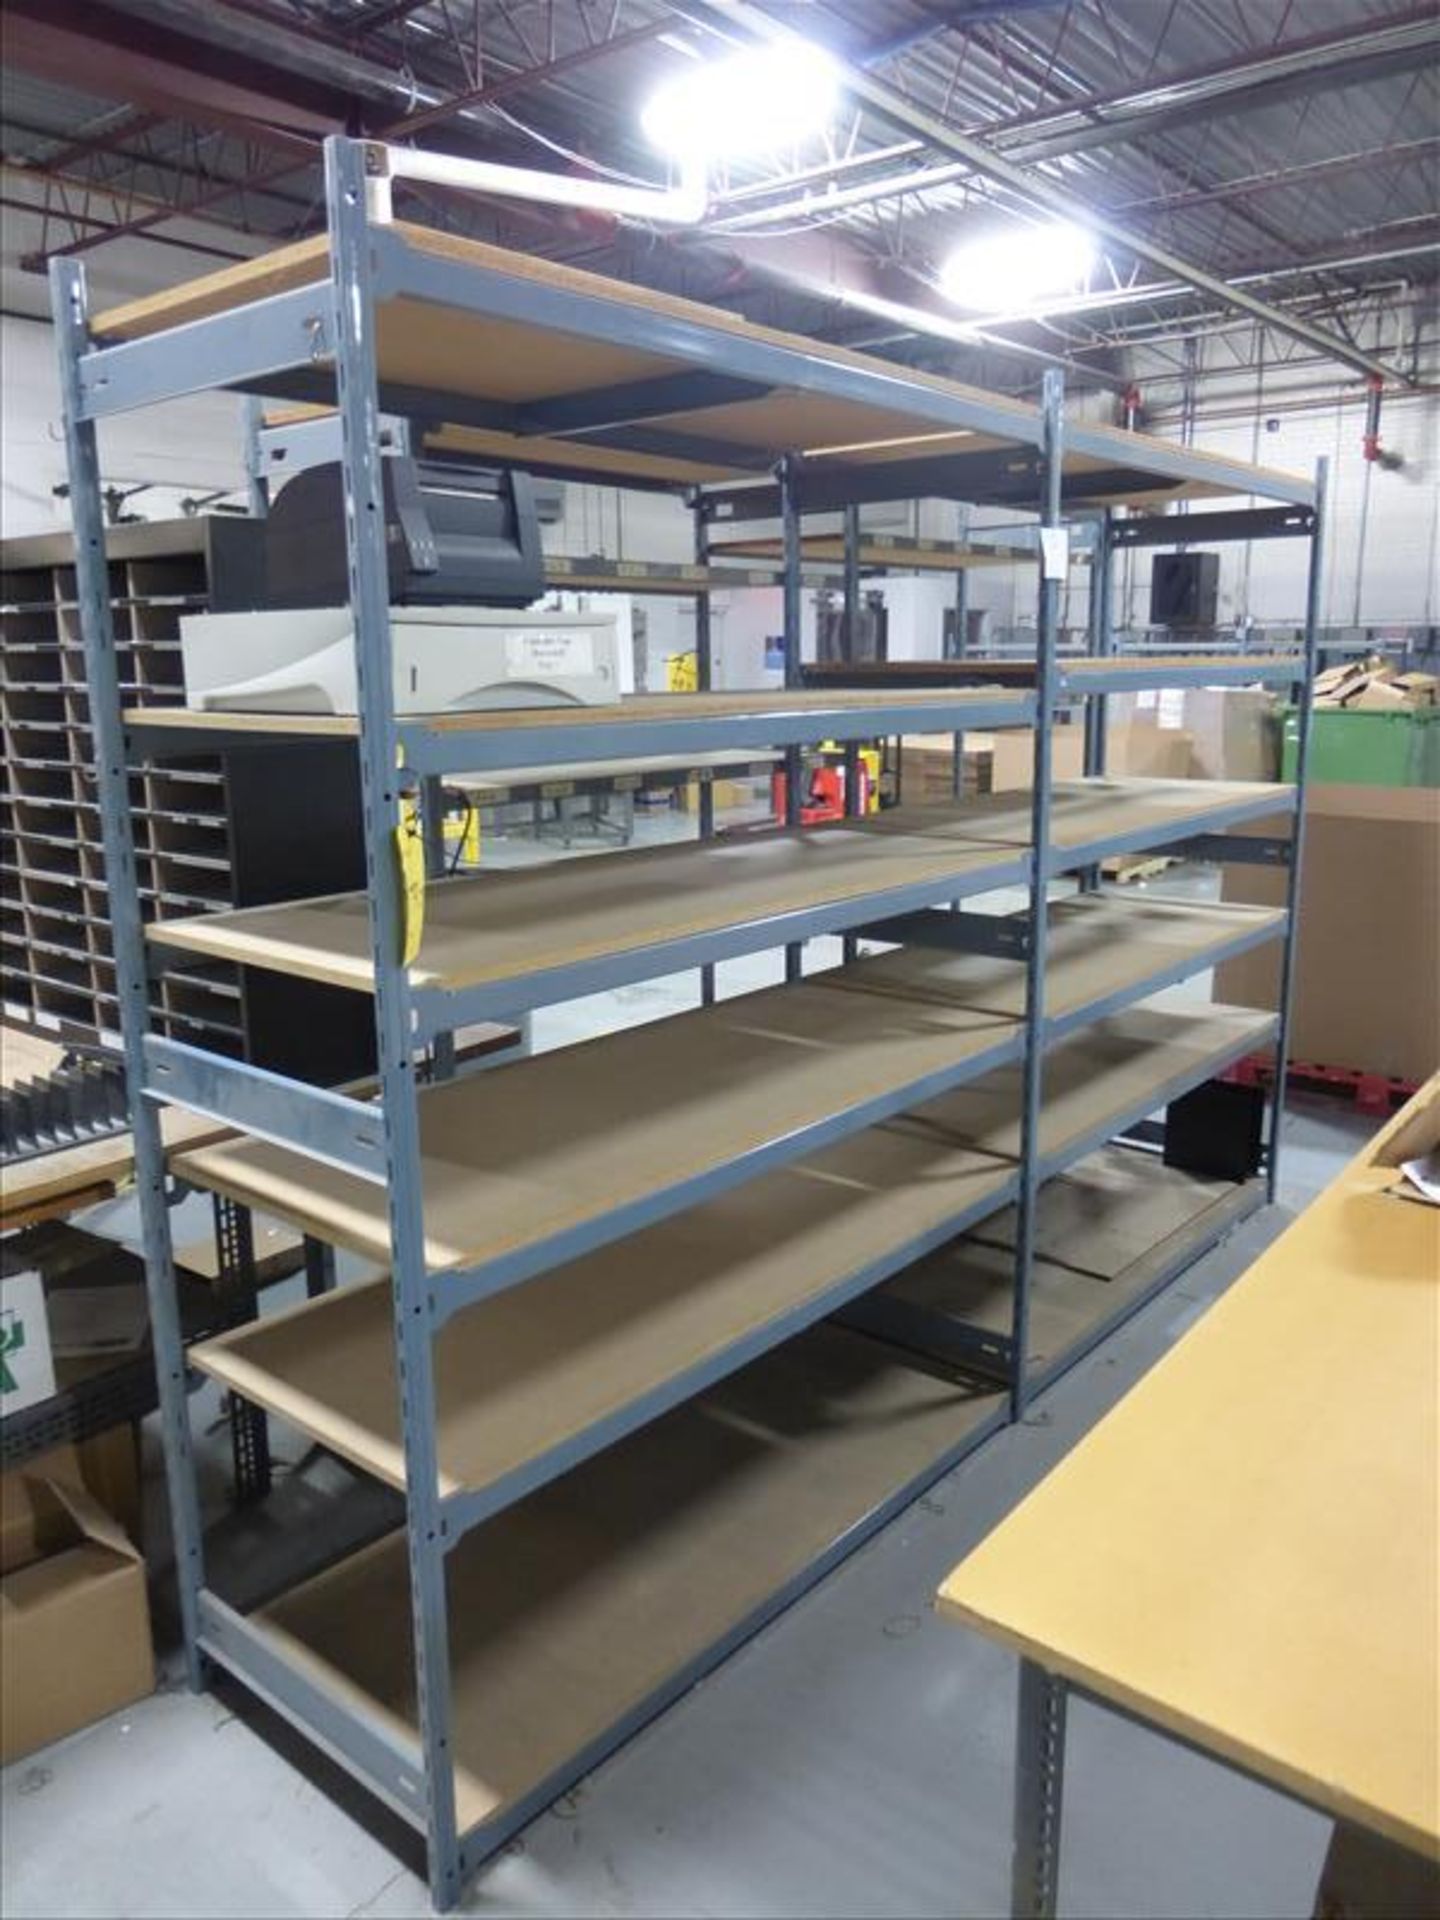 (2) Sections Dexion shelving